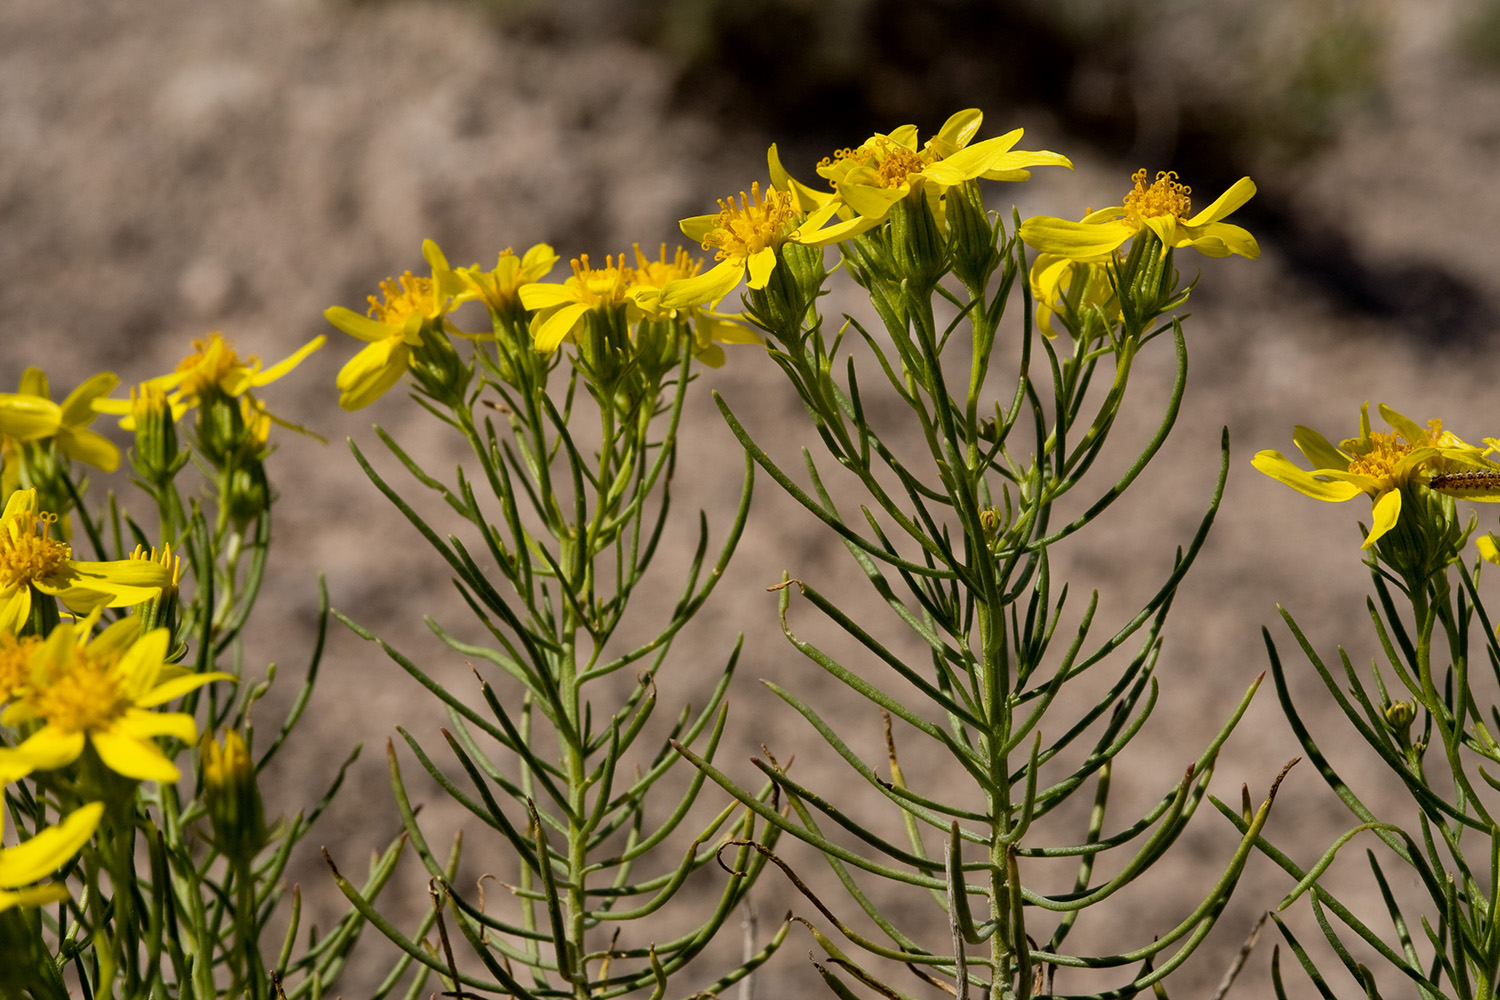 Senecio warnockii stem with long, linear leaves and multiple yellow flowers in a cluster